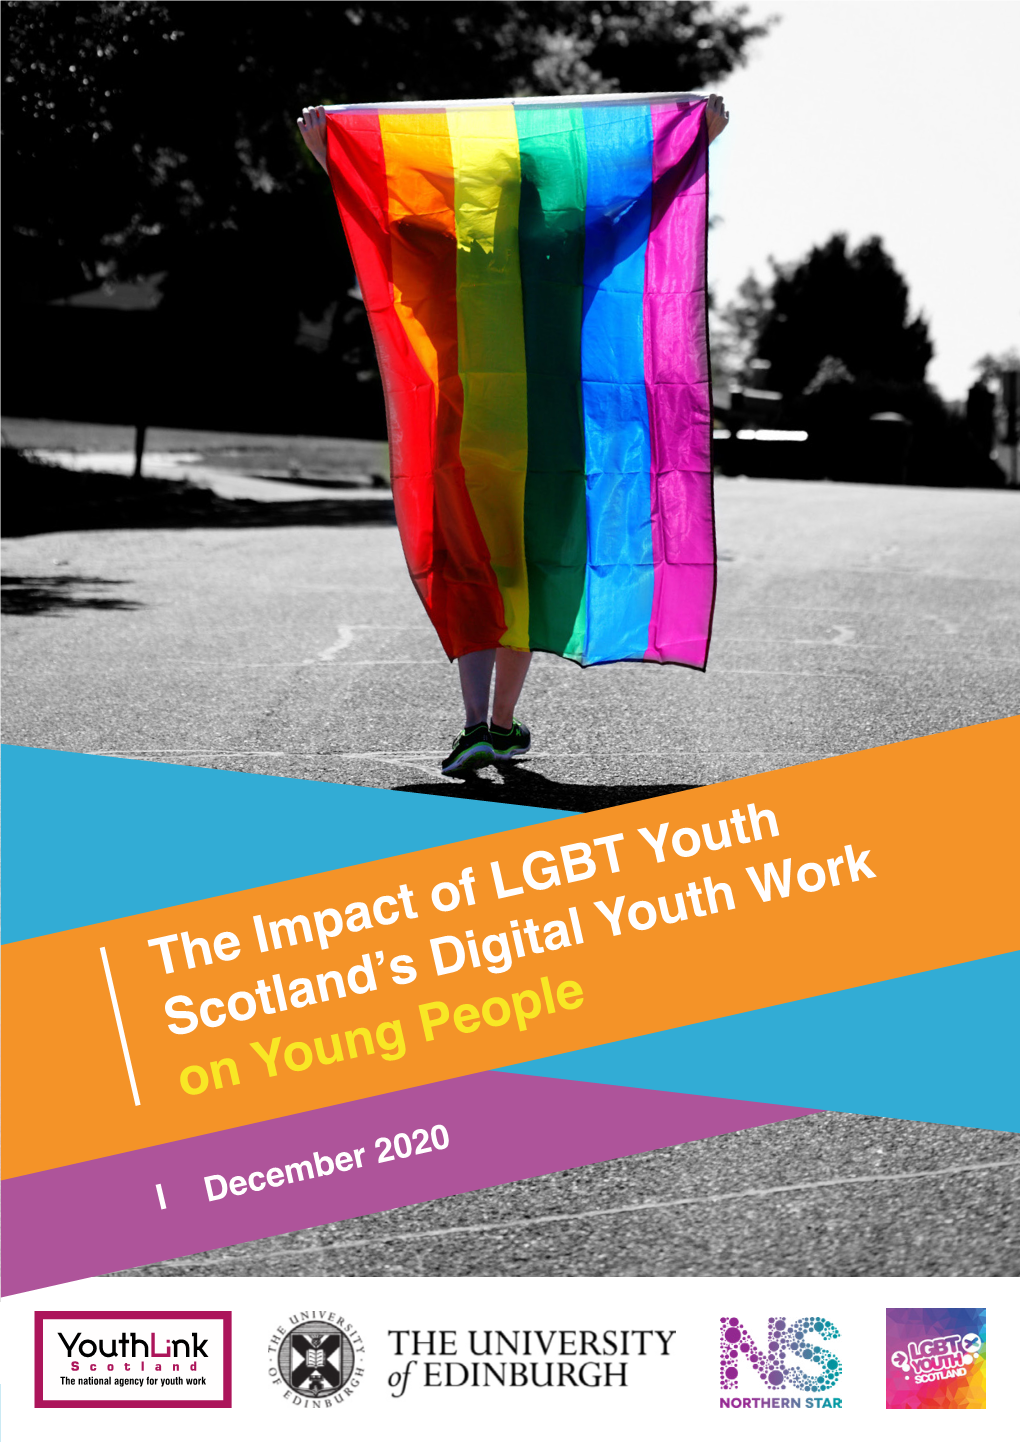 The Impact of LGBT Youth Scotland's Digital Youth Work on Young People